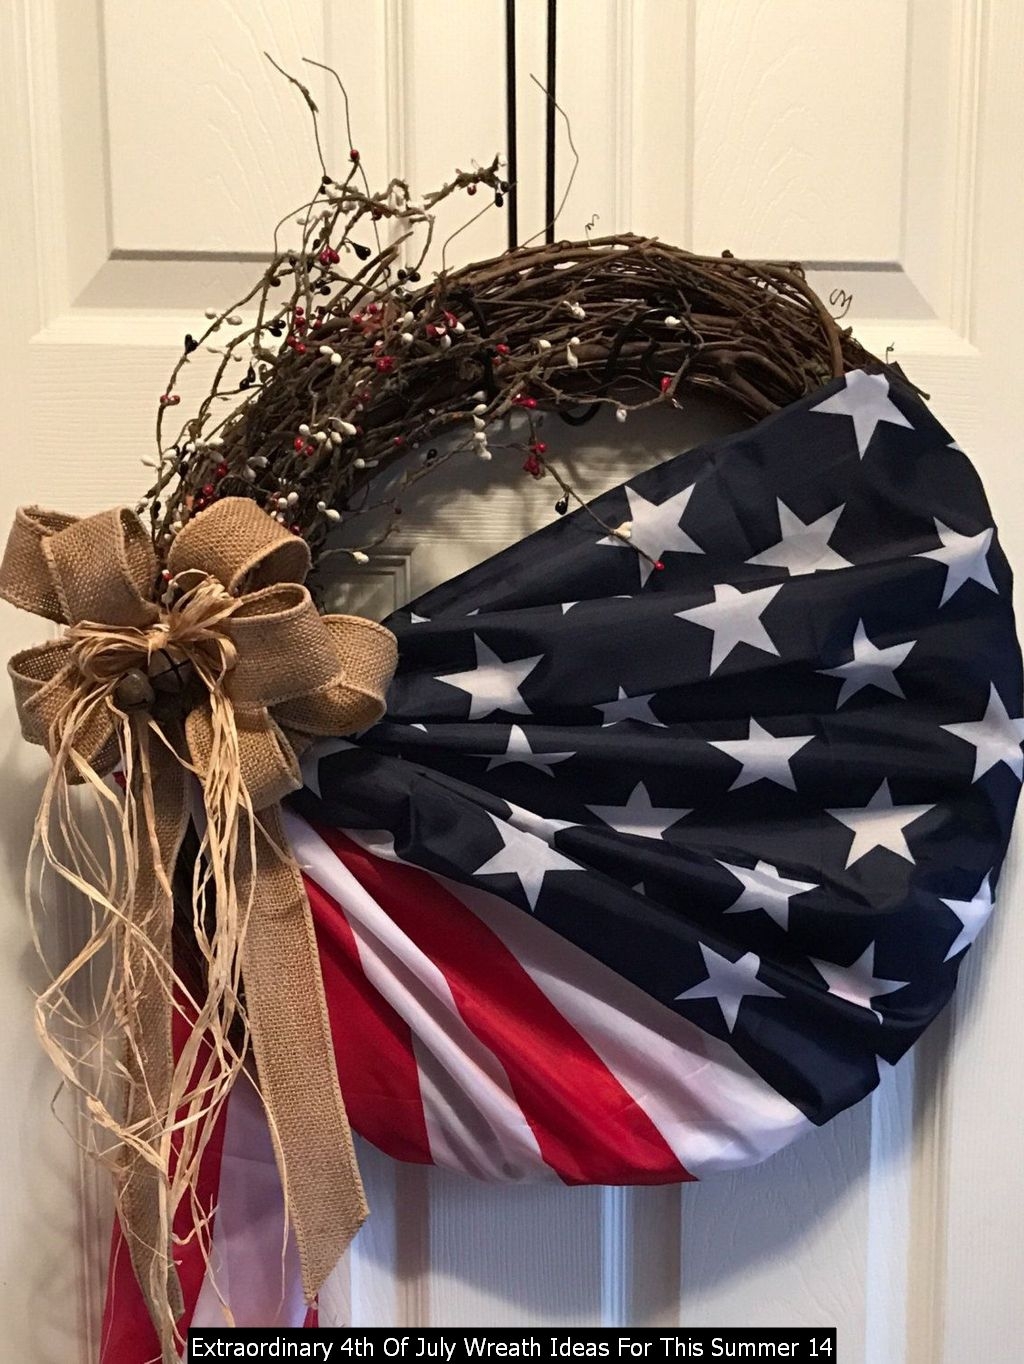 Extraordinary 4th Of July Wreath Ideas For This Summer 14